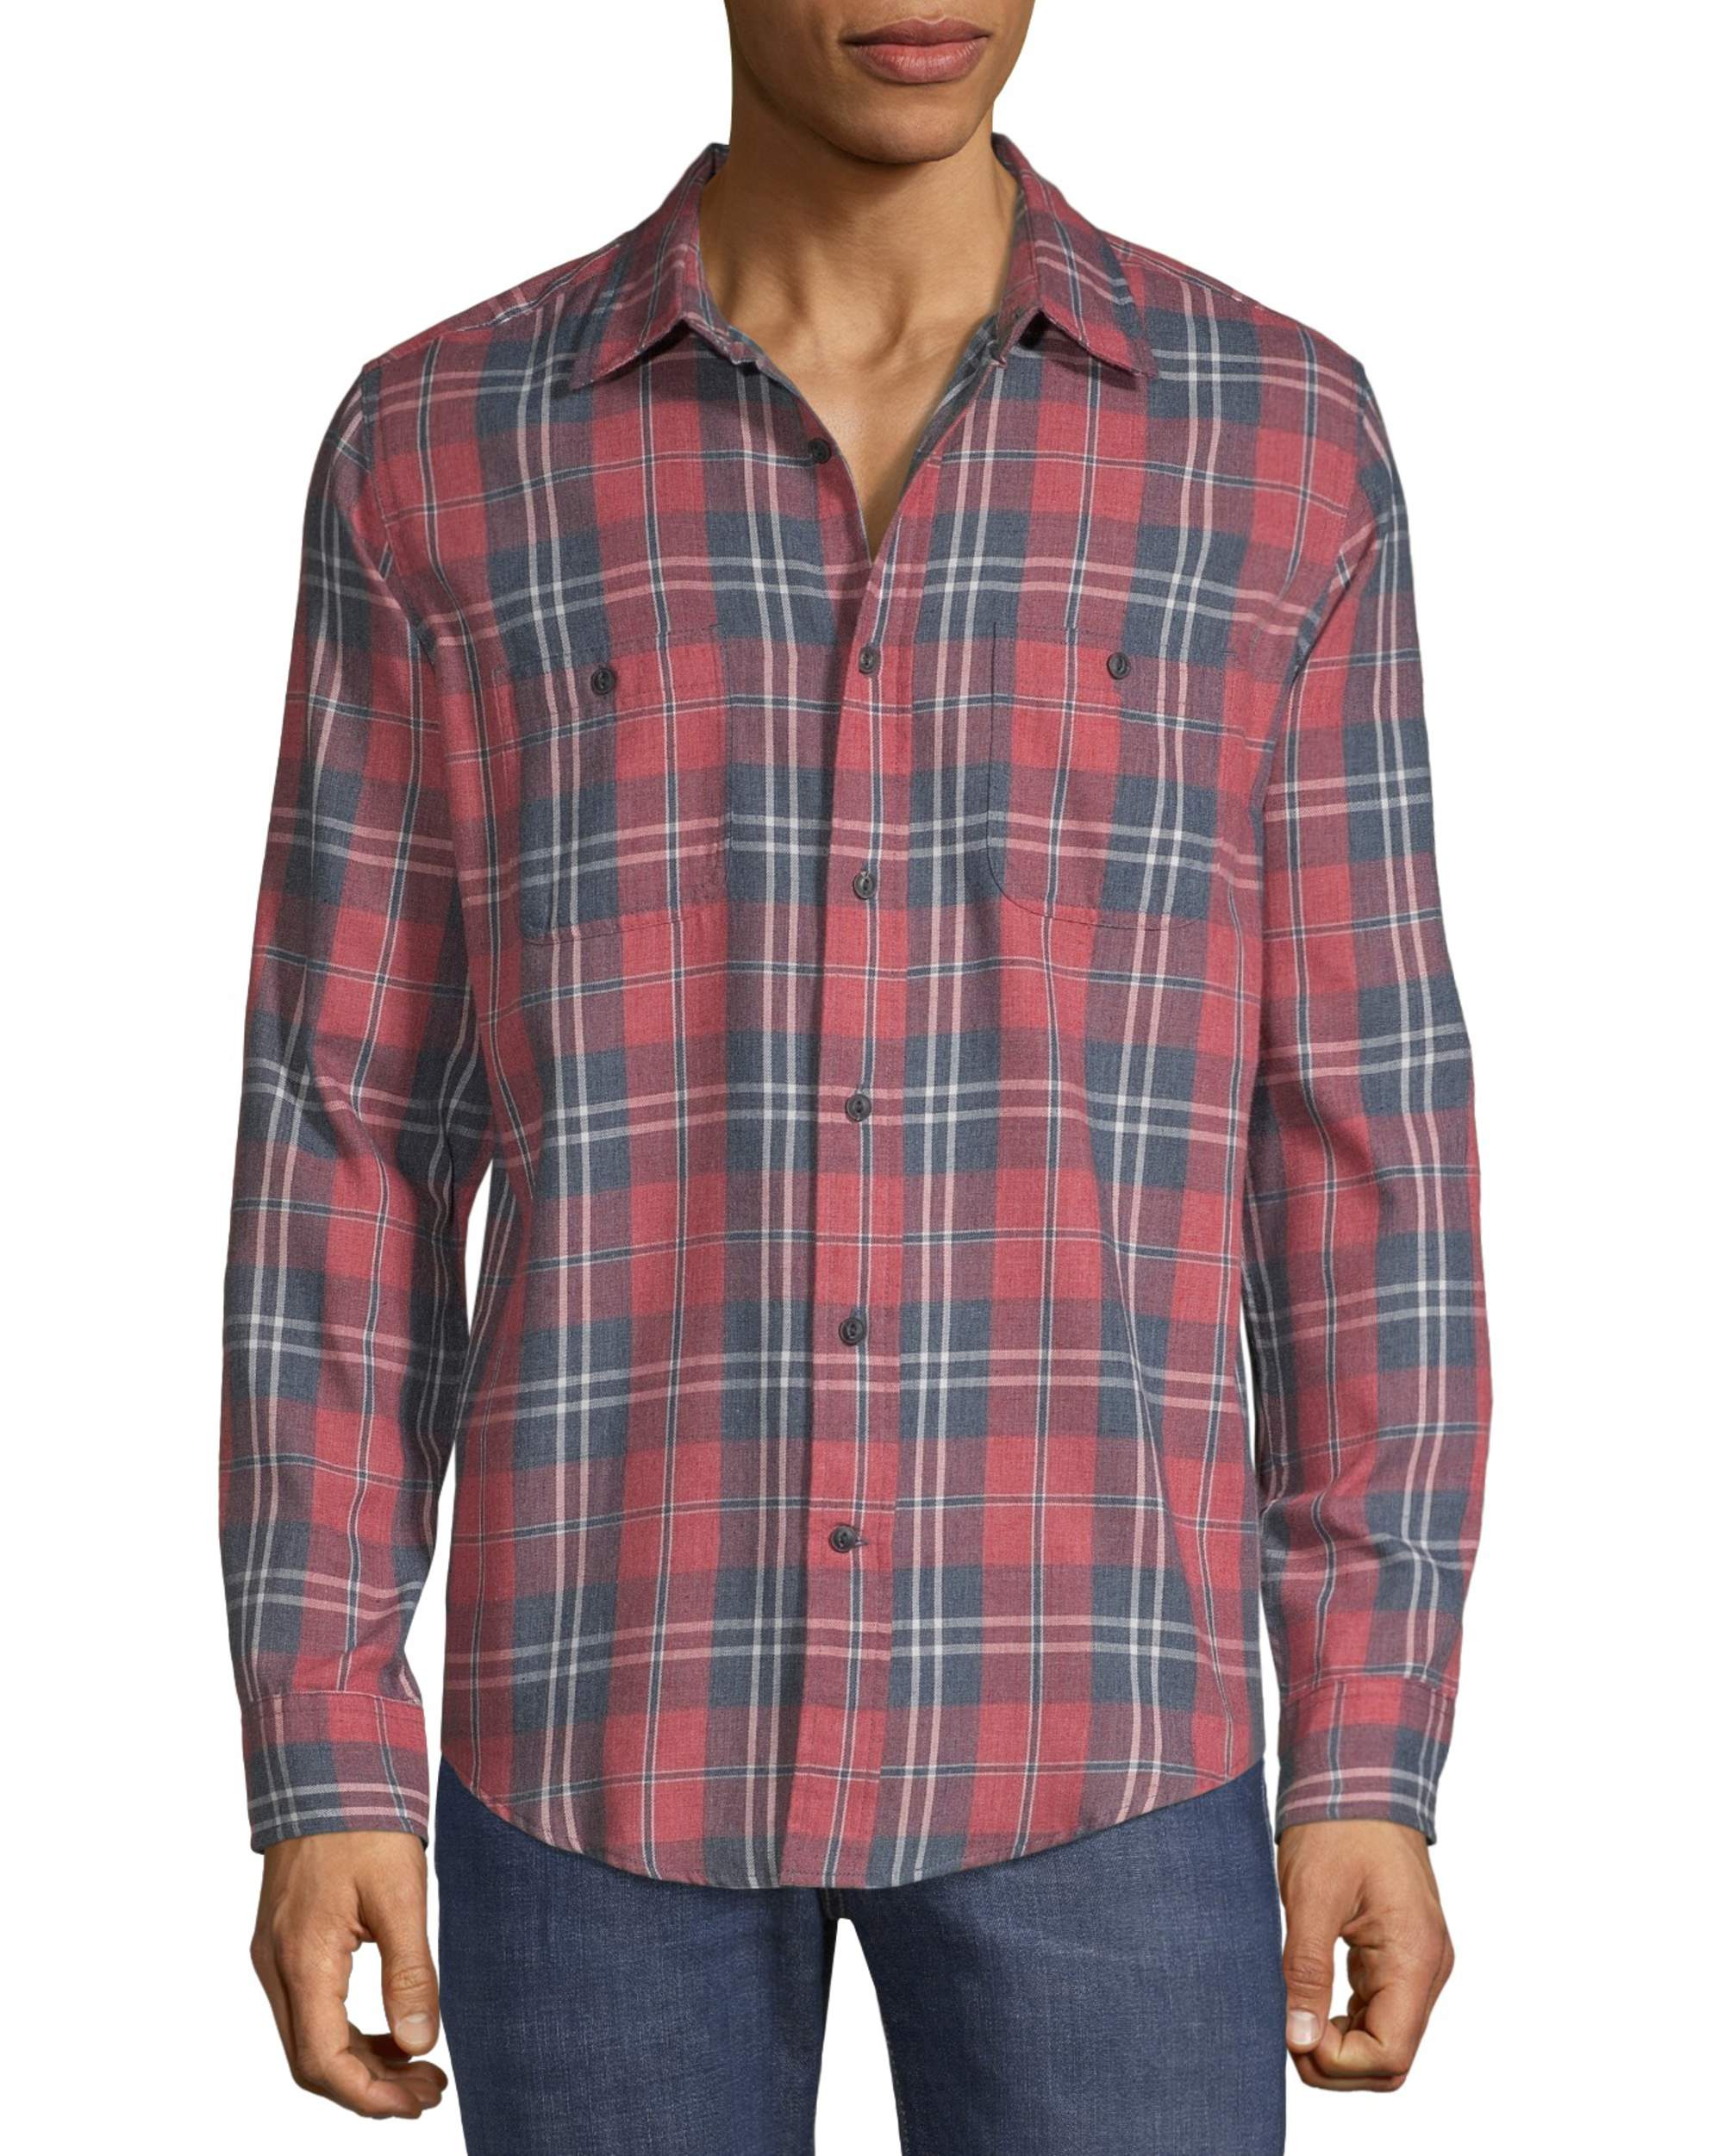 9 Seriously Soft Flannel Shirt Men's Small Plaid MSRP $40 NWT Apt